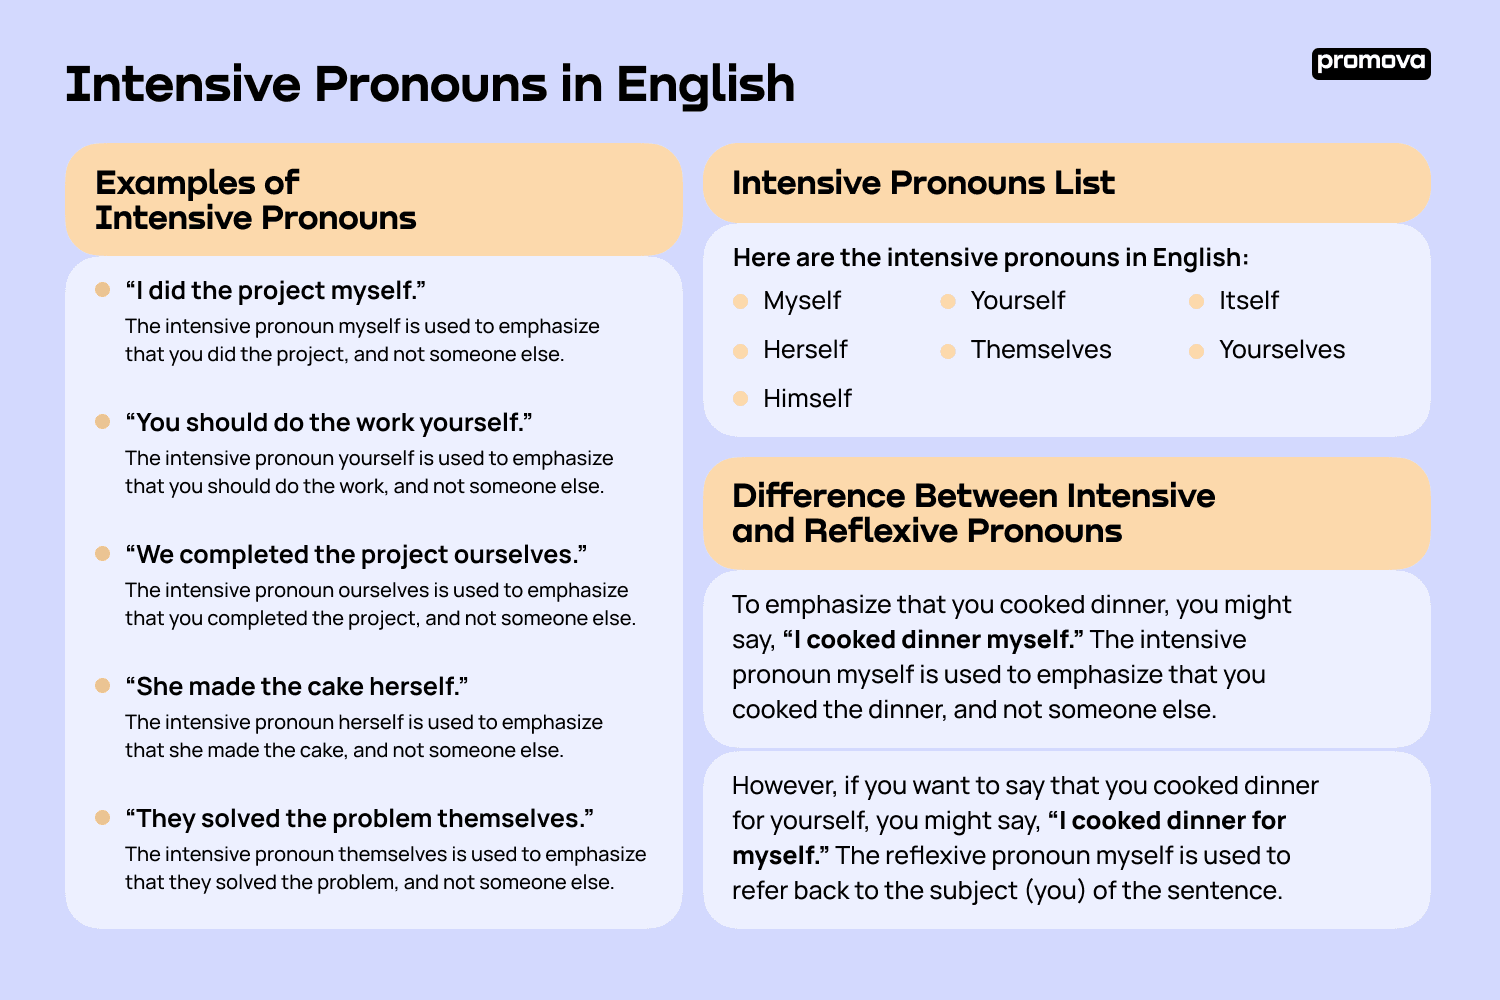 Examples of Intensive Pronouns